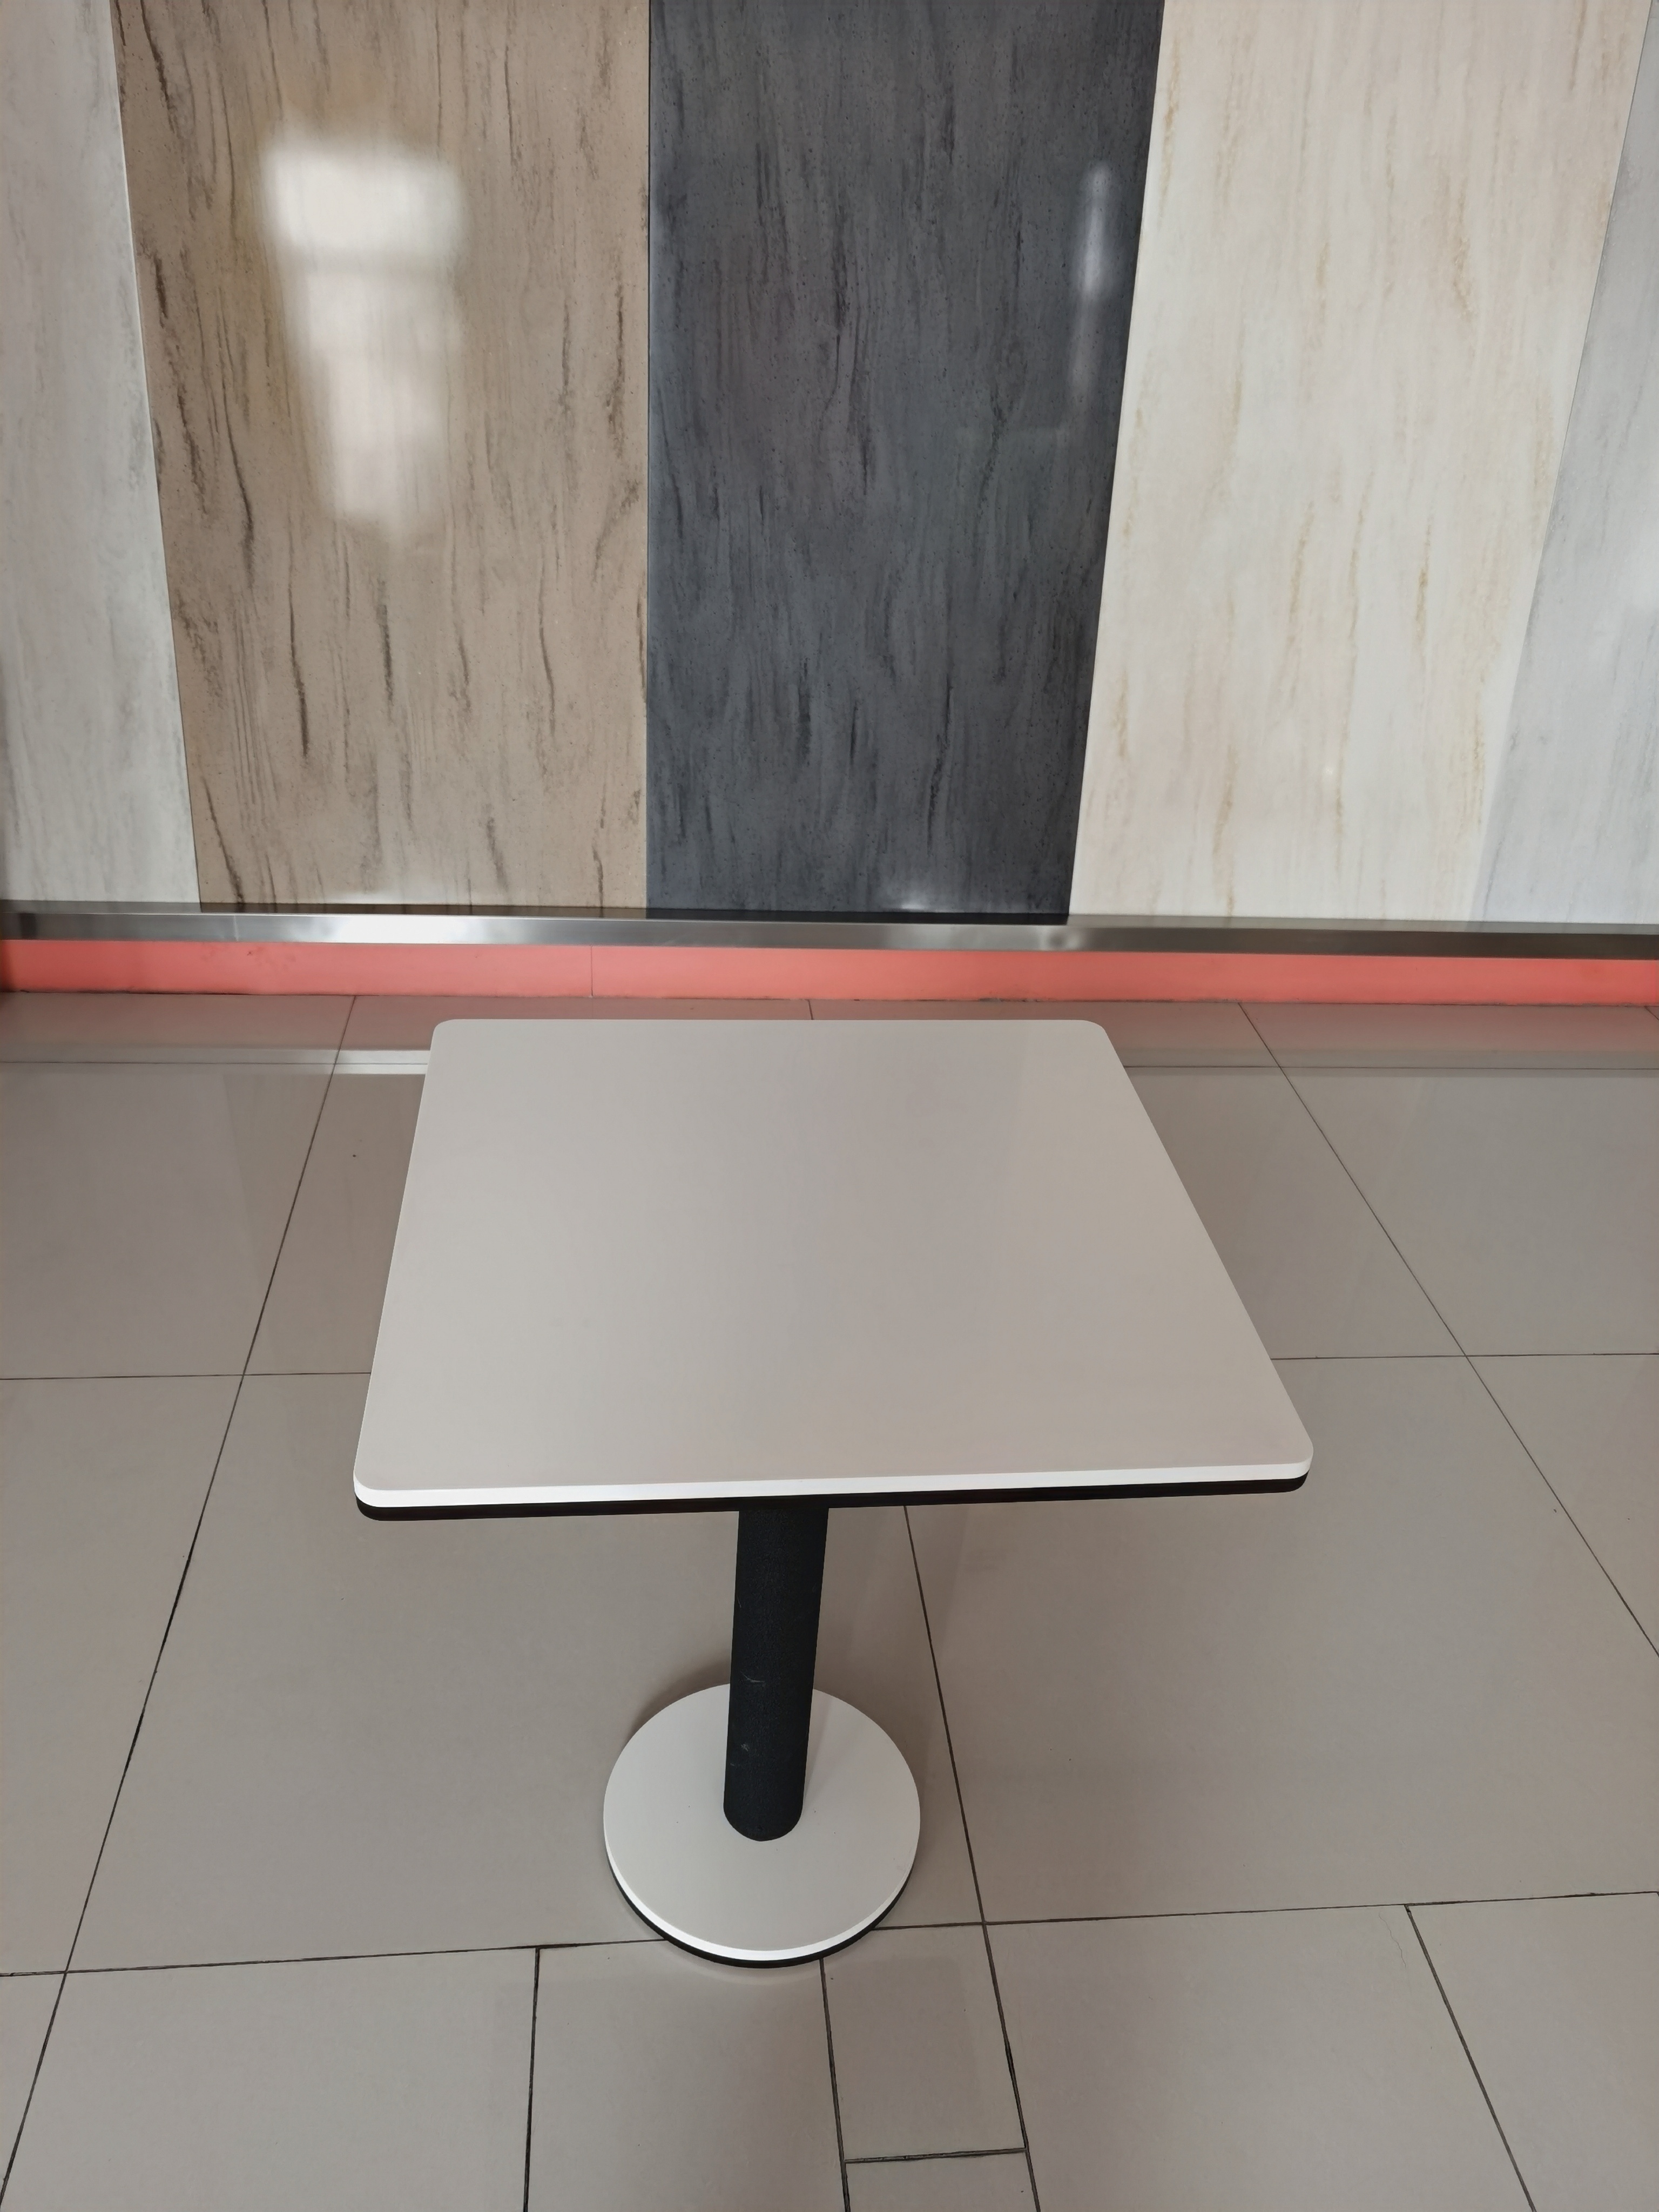 Restaurant Table Top Solid Surface Composite Acrylic Stone Countertop 